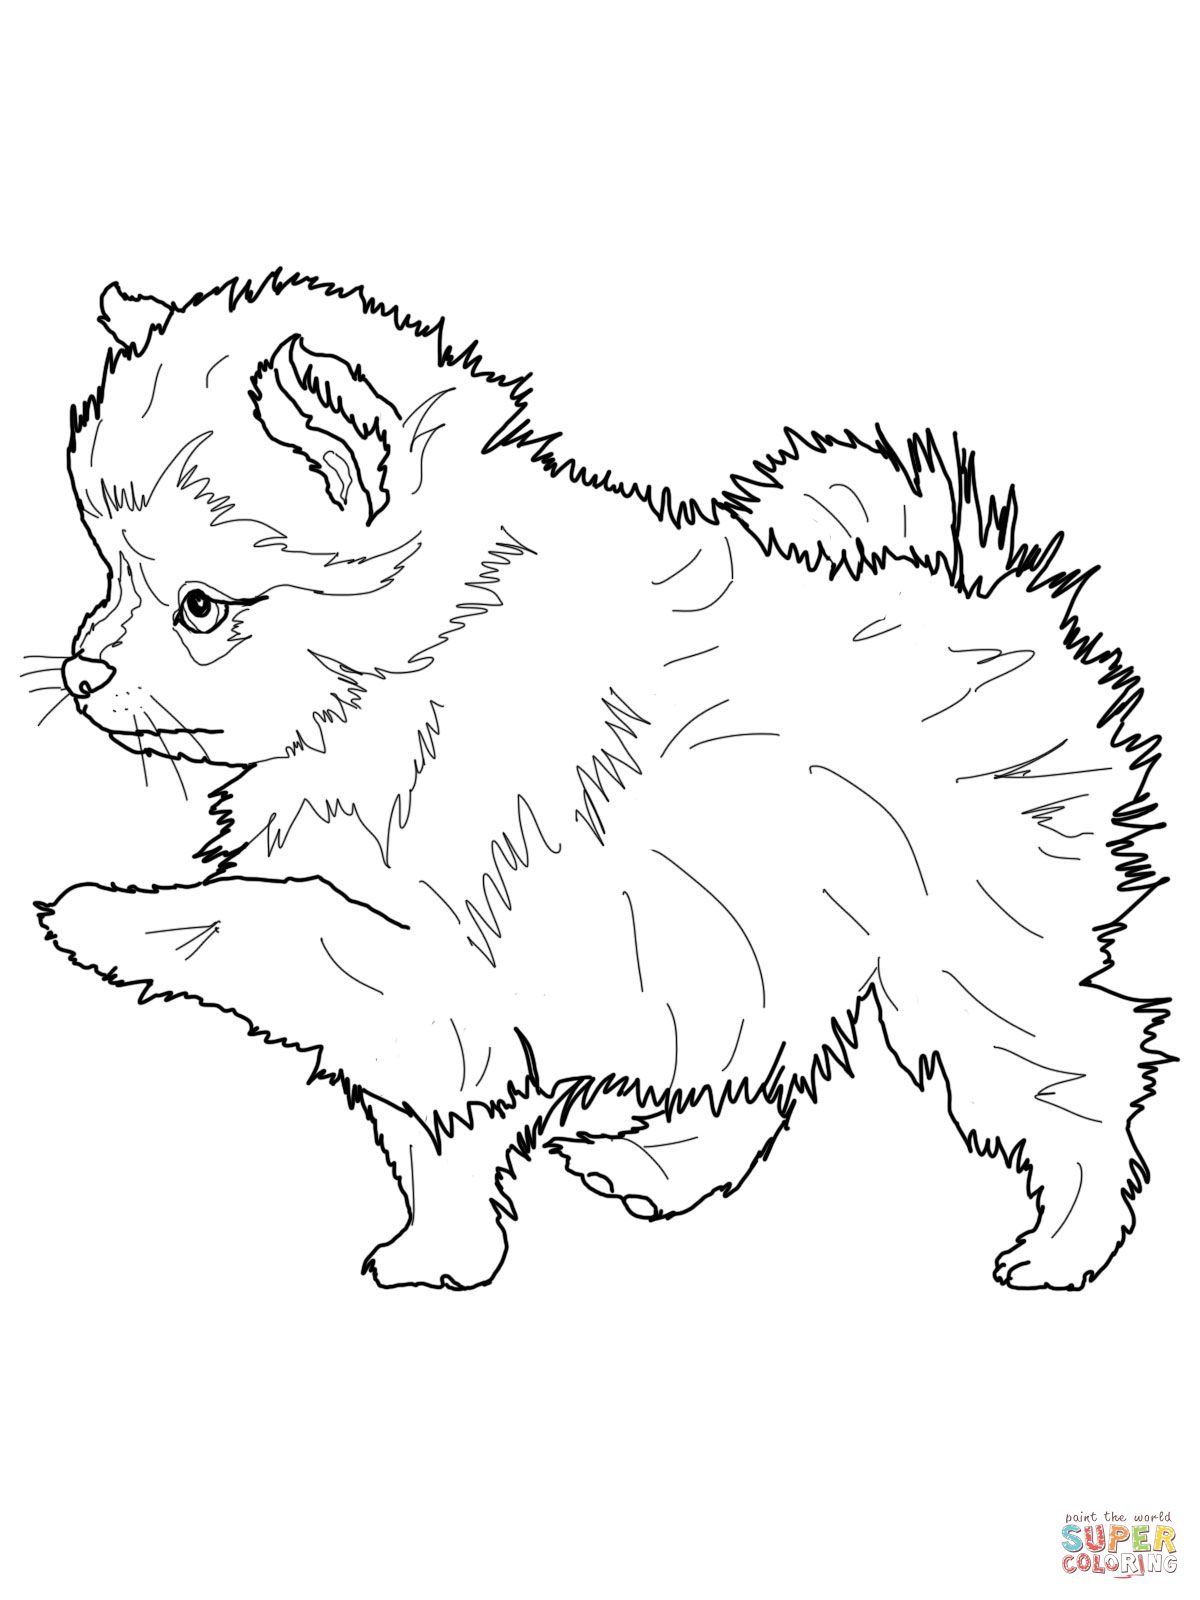 Pomeranian puppy dog coloring page